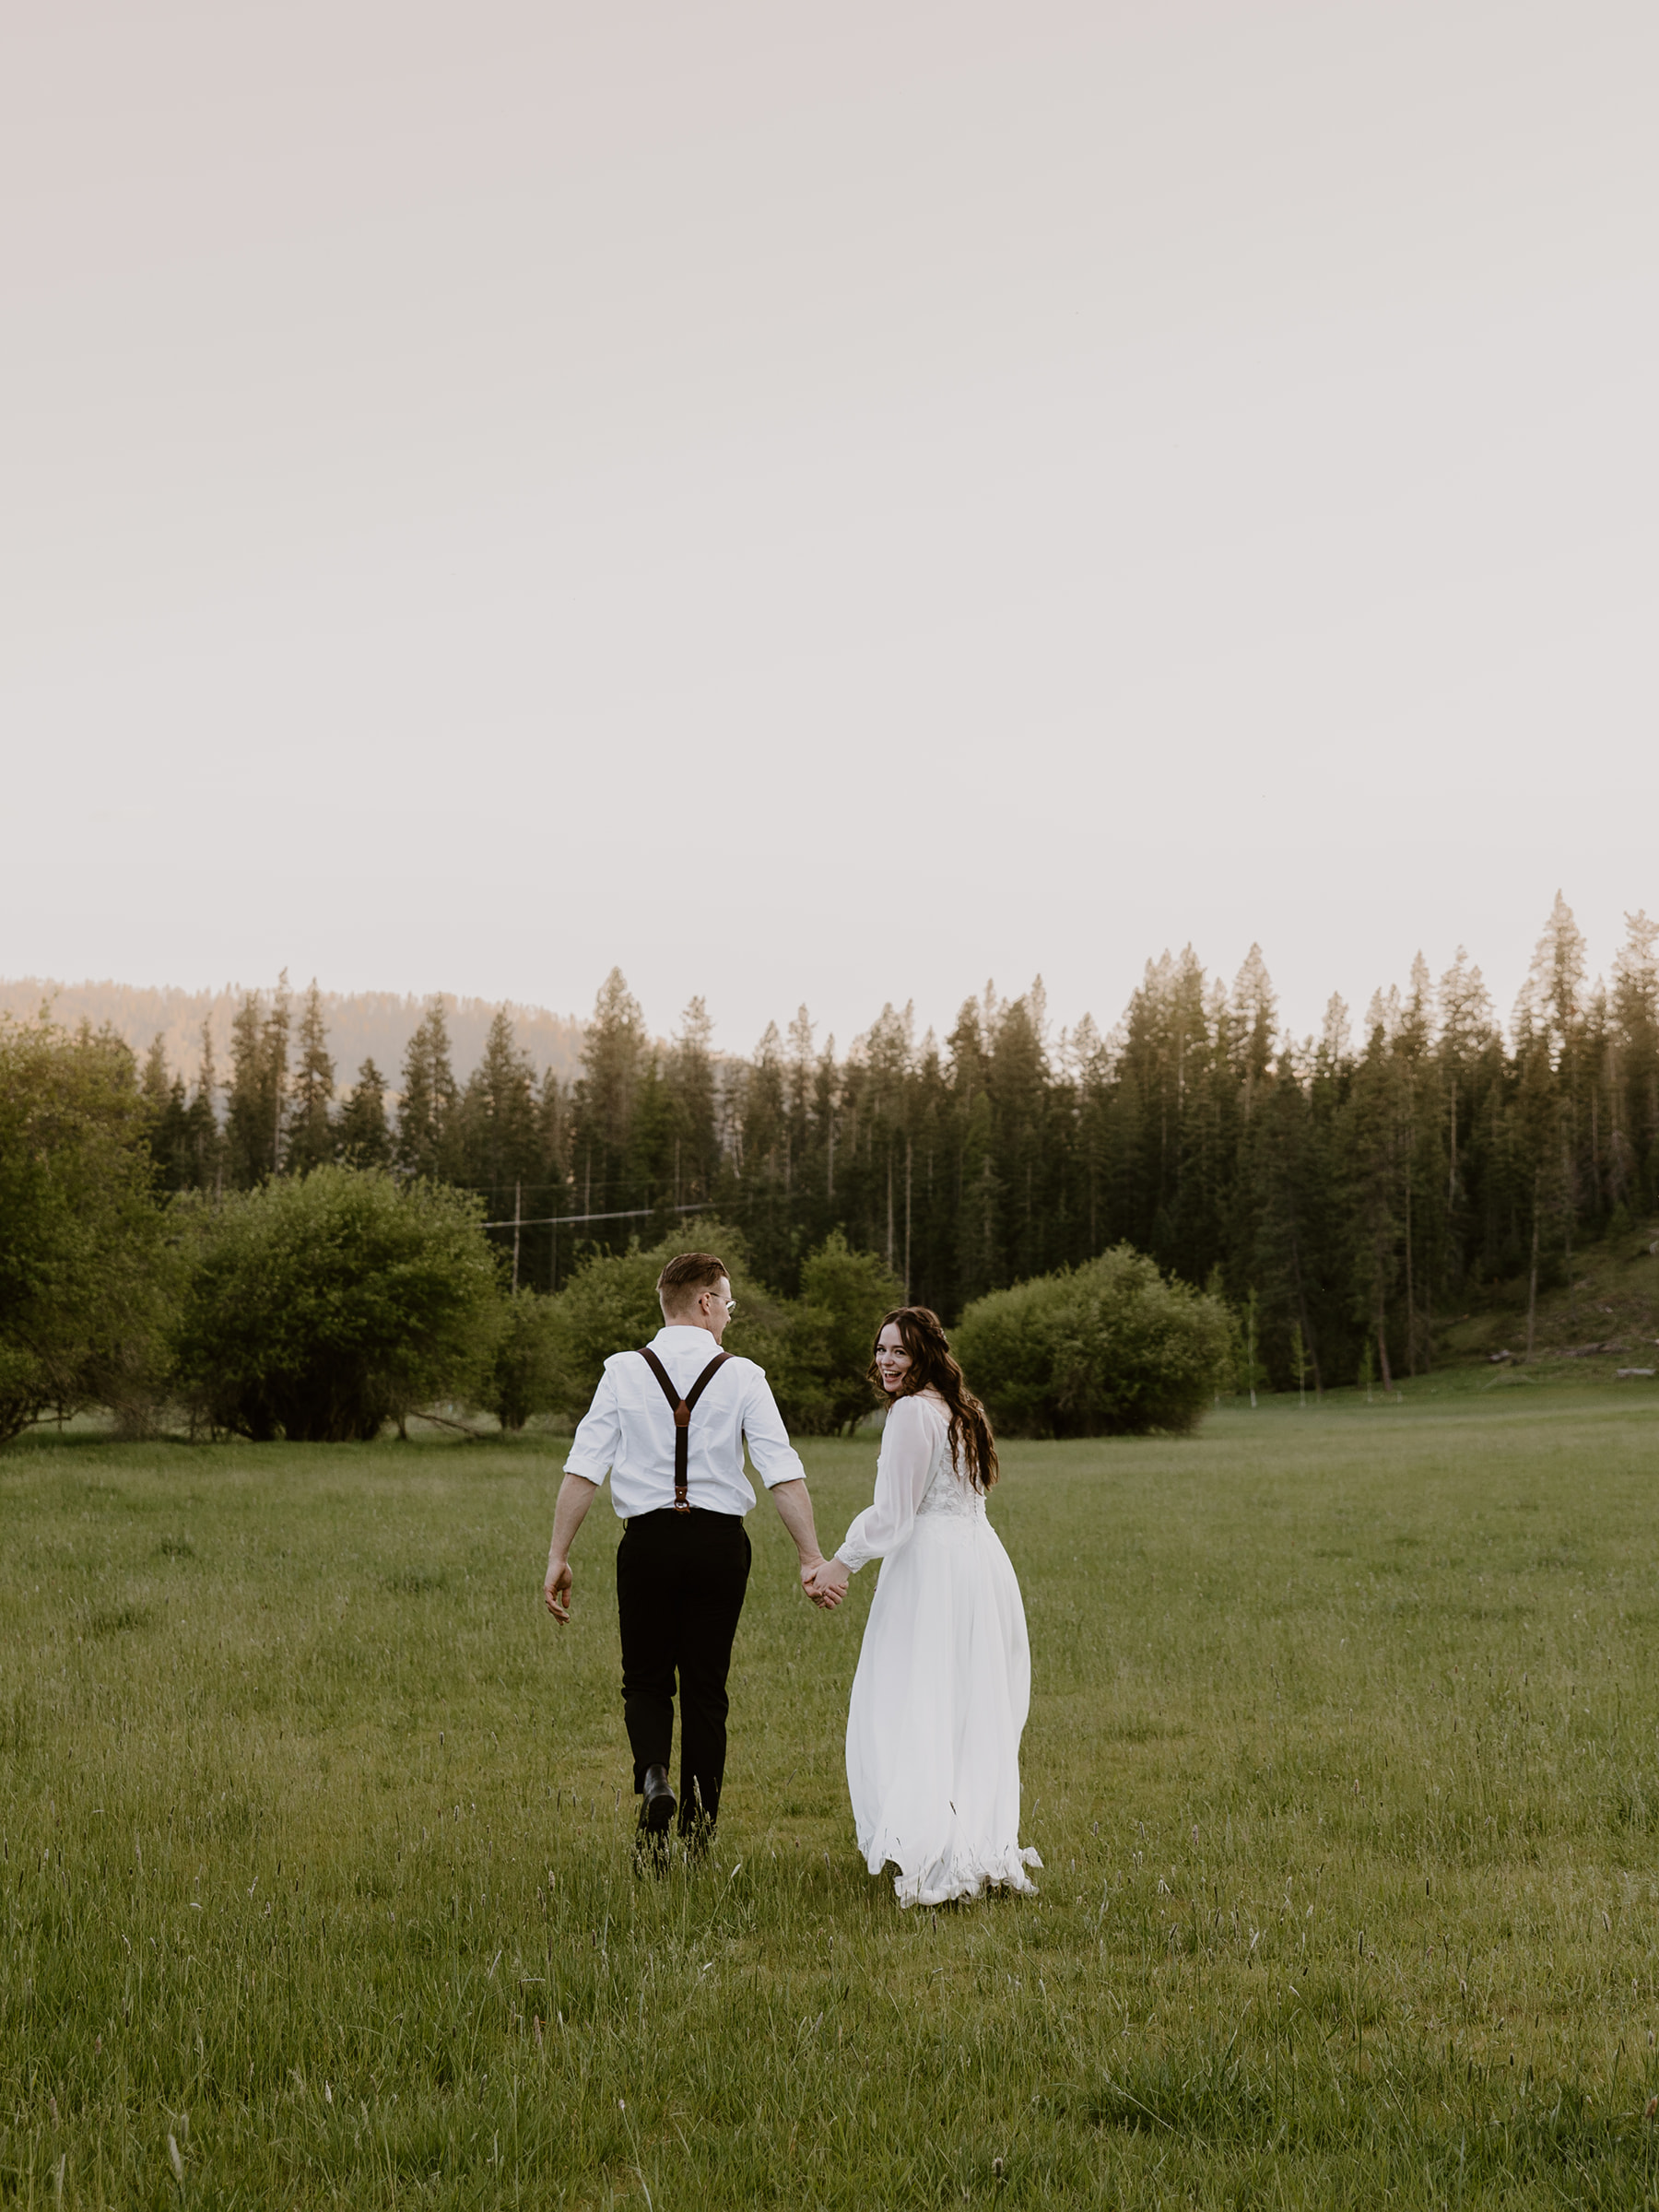 a man and woman in wedding outfits walking in a field, the bride is looking back smiling